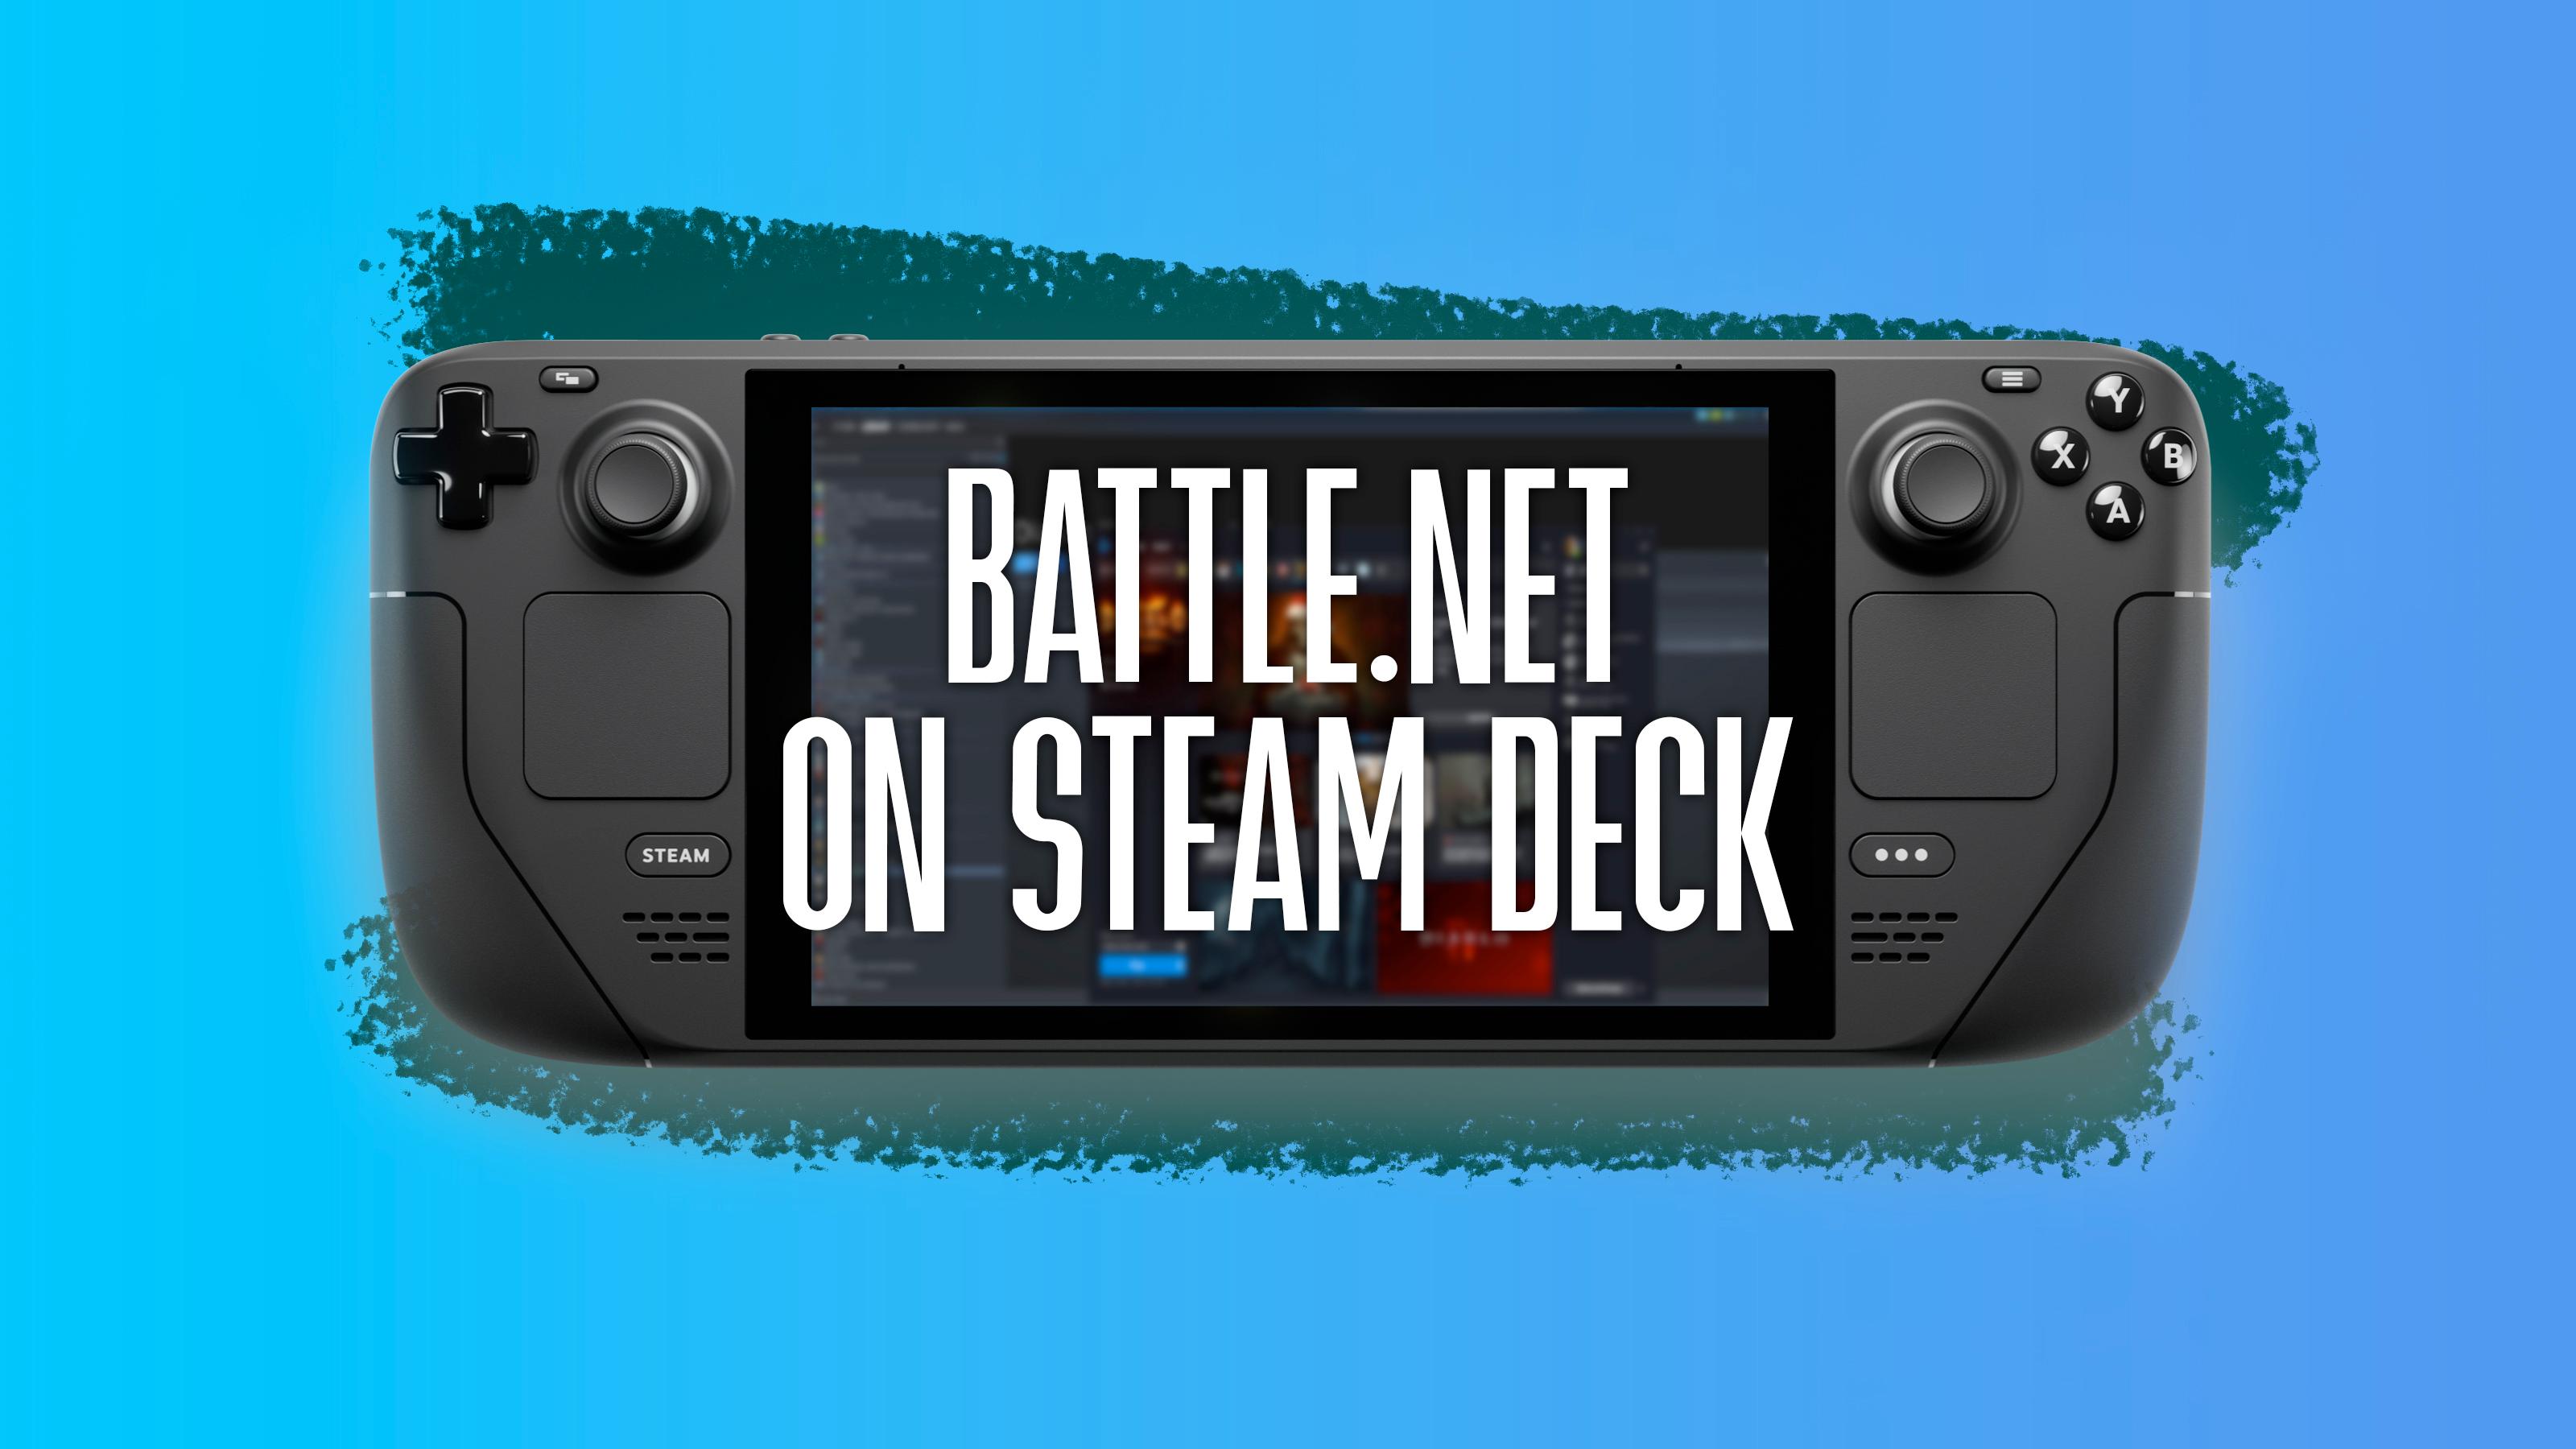 5 Free Games Every Steam Deck Owner Should Have Installed